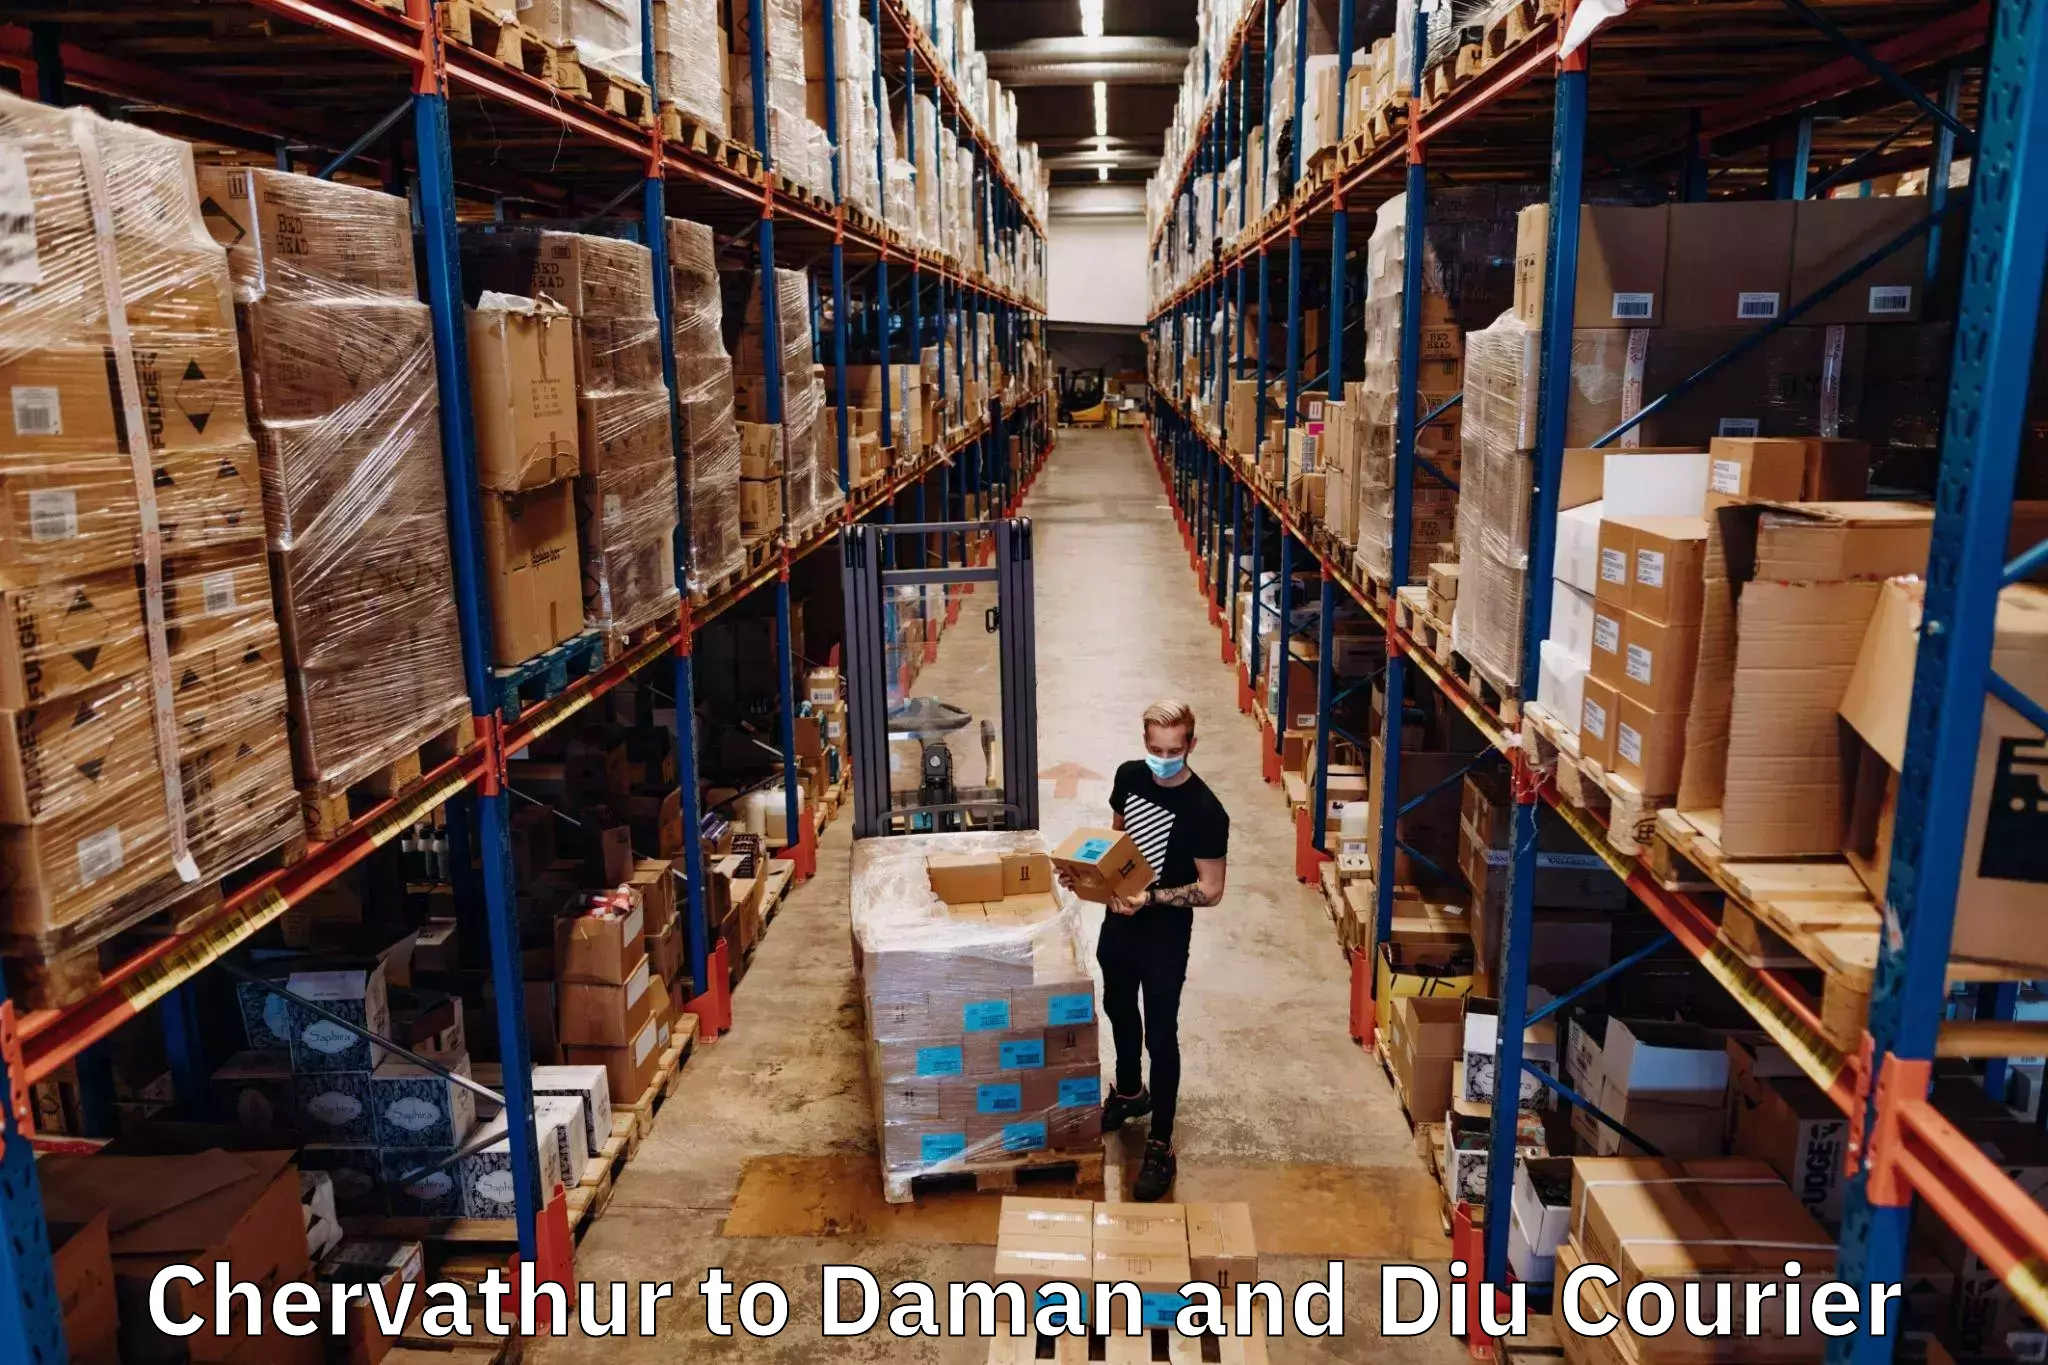 Efficient shipping operations Chervathur to Diu